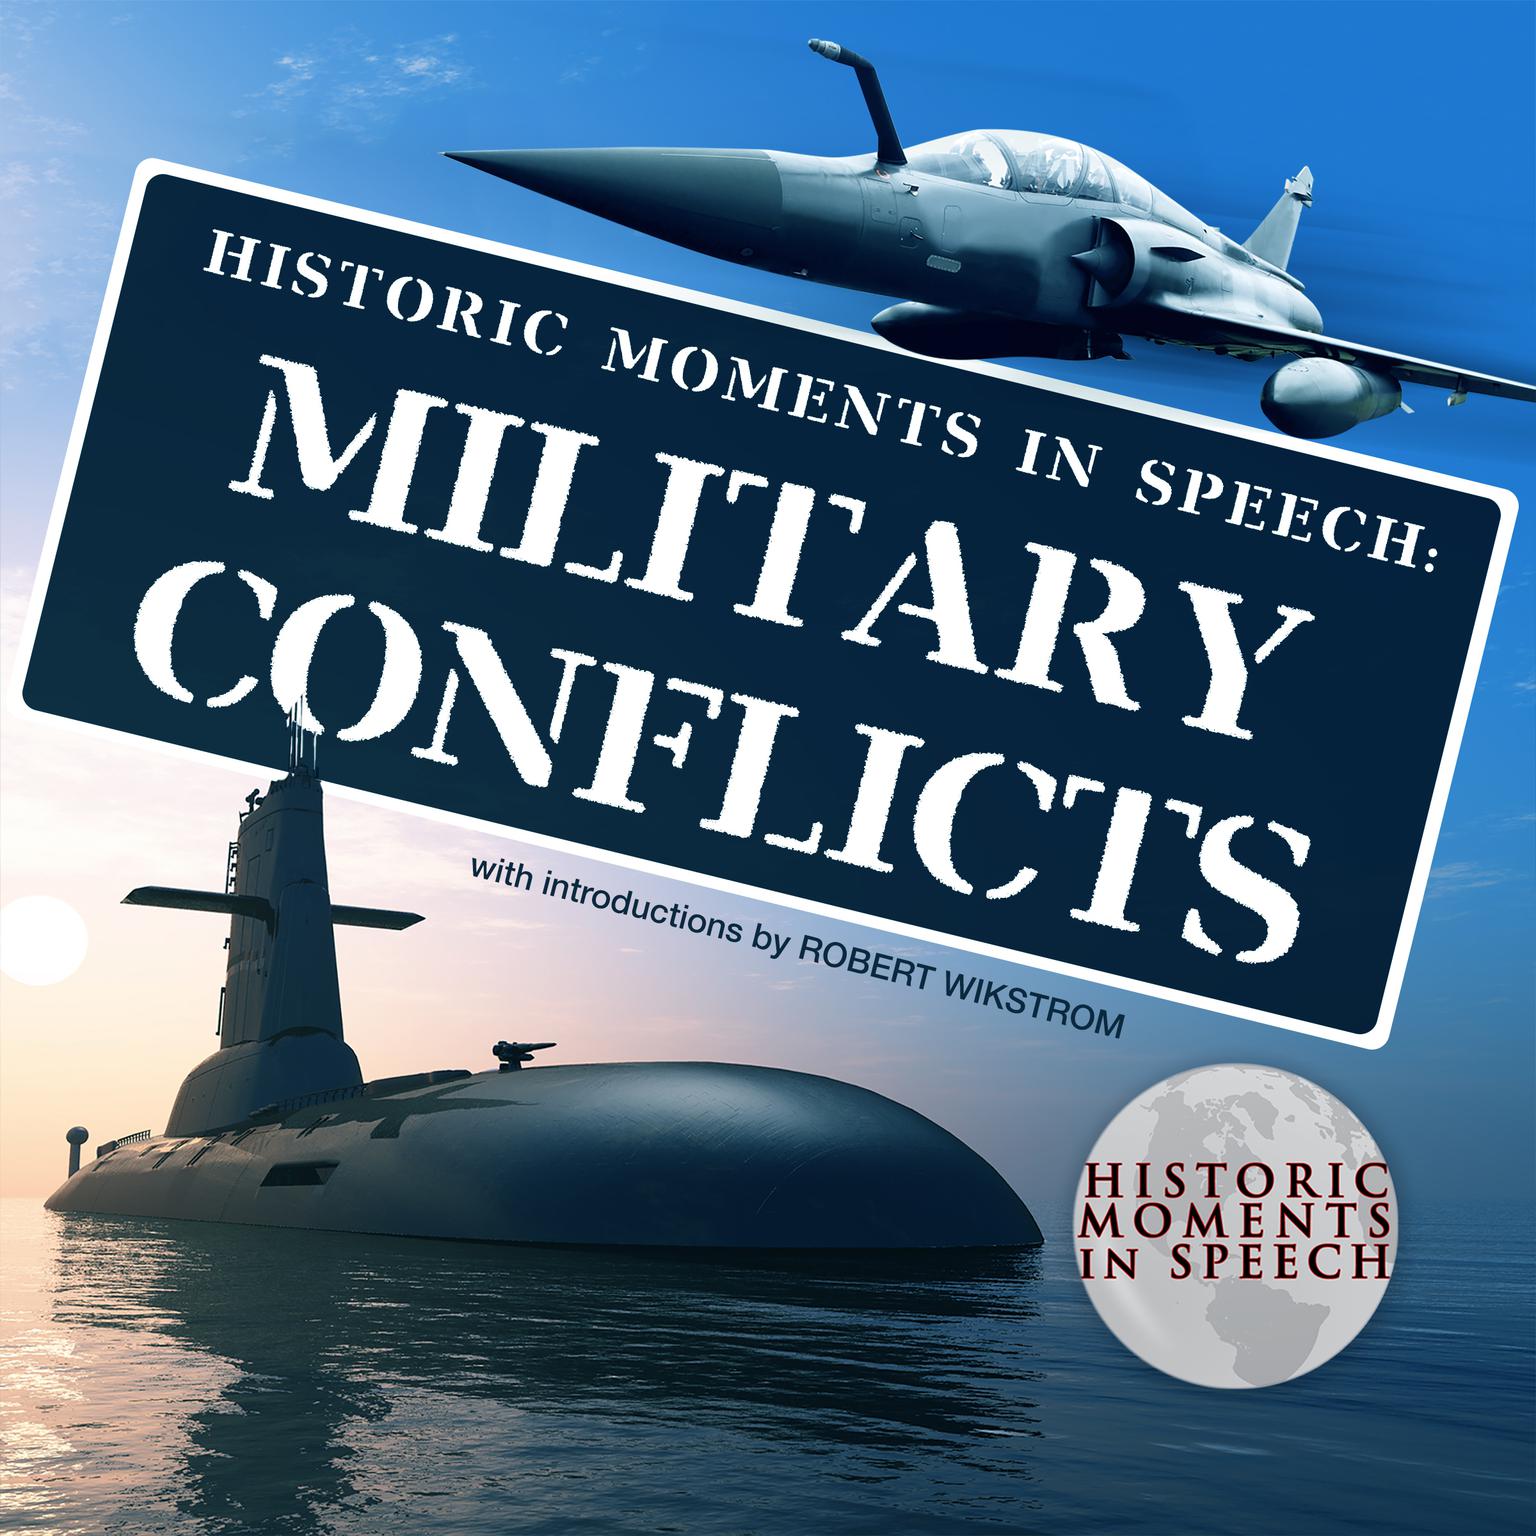 Military Conflicts Audiobook, by the Speech Resource Company